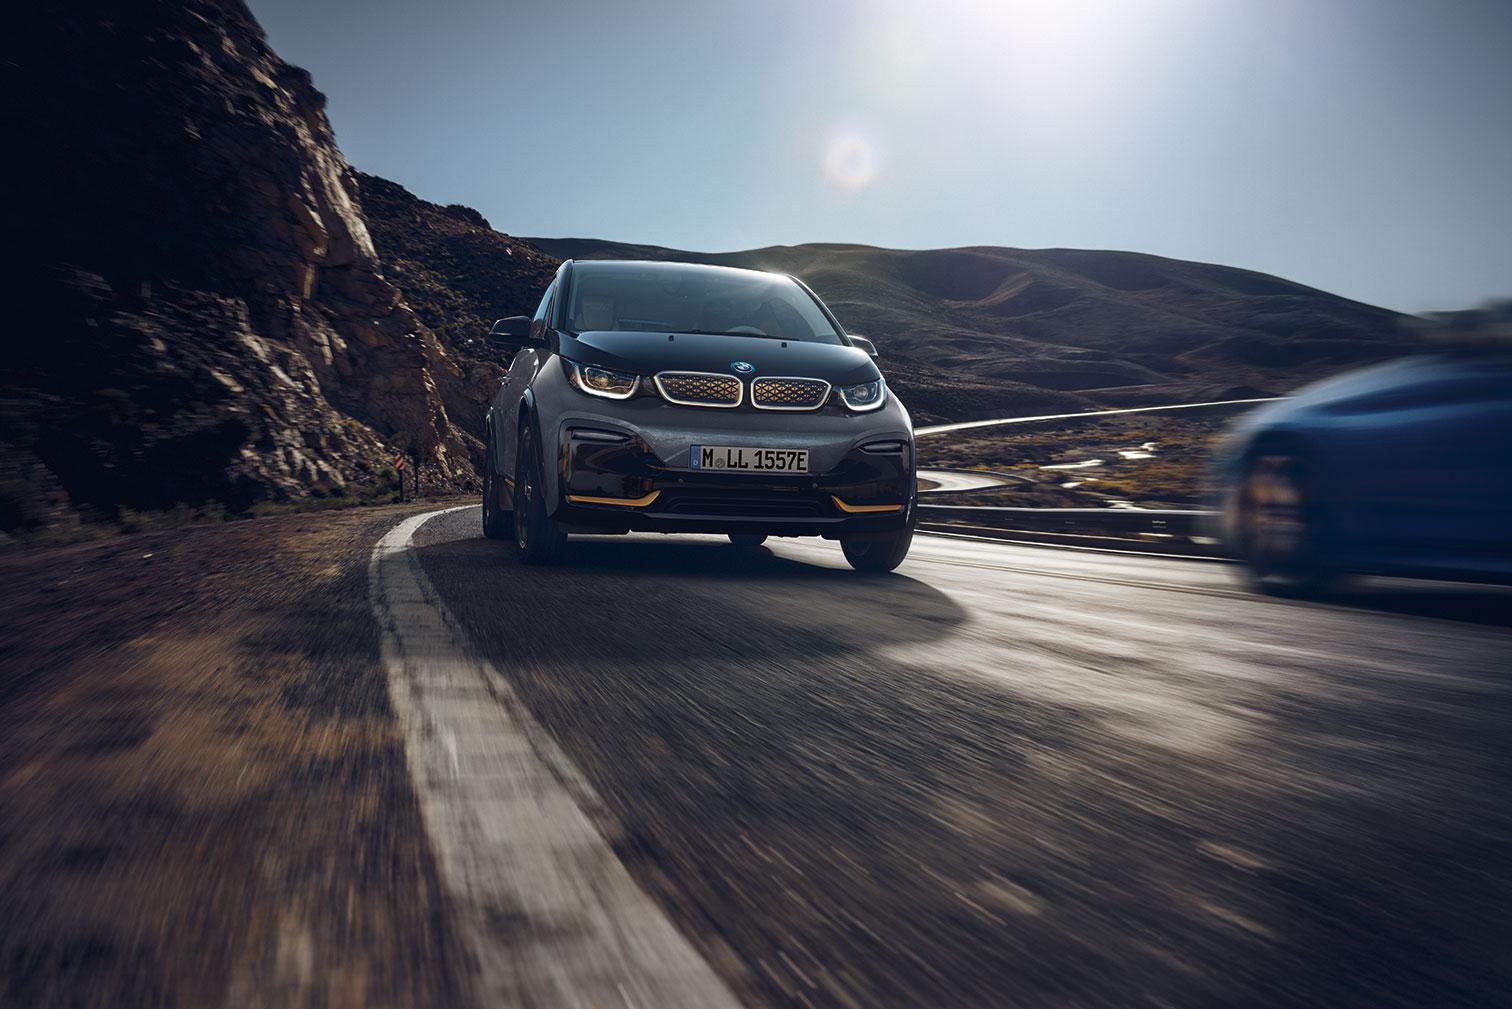 BMW i3 on the road